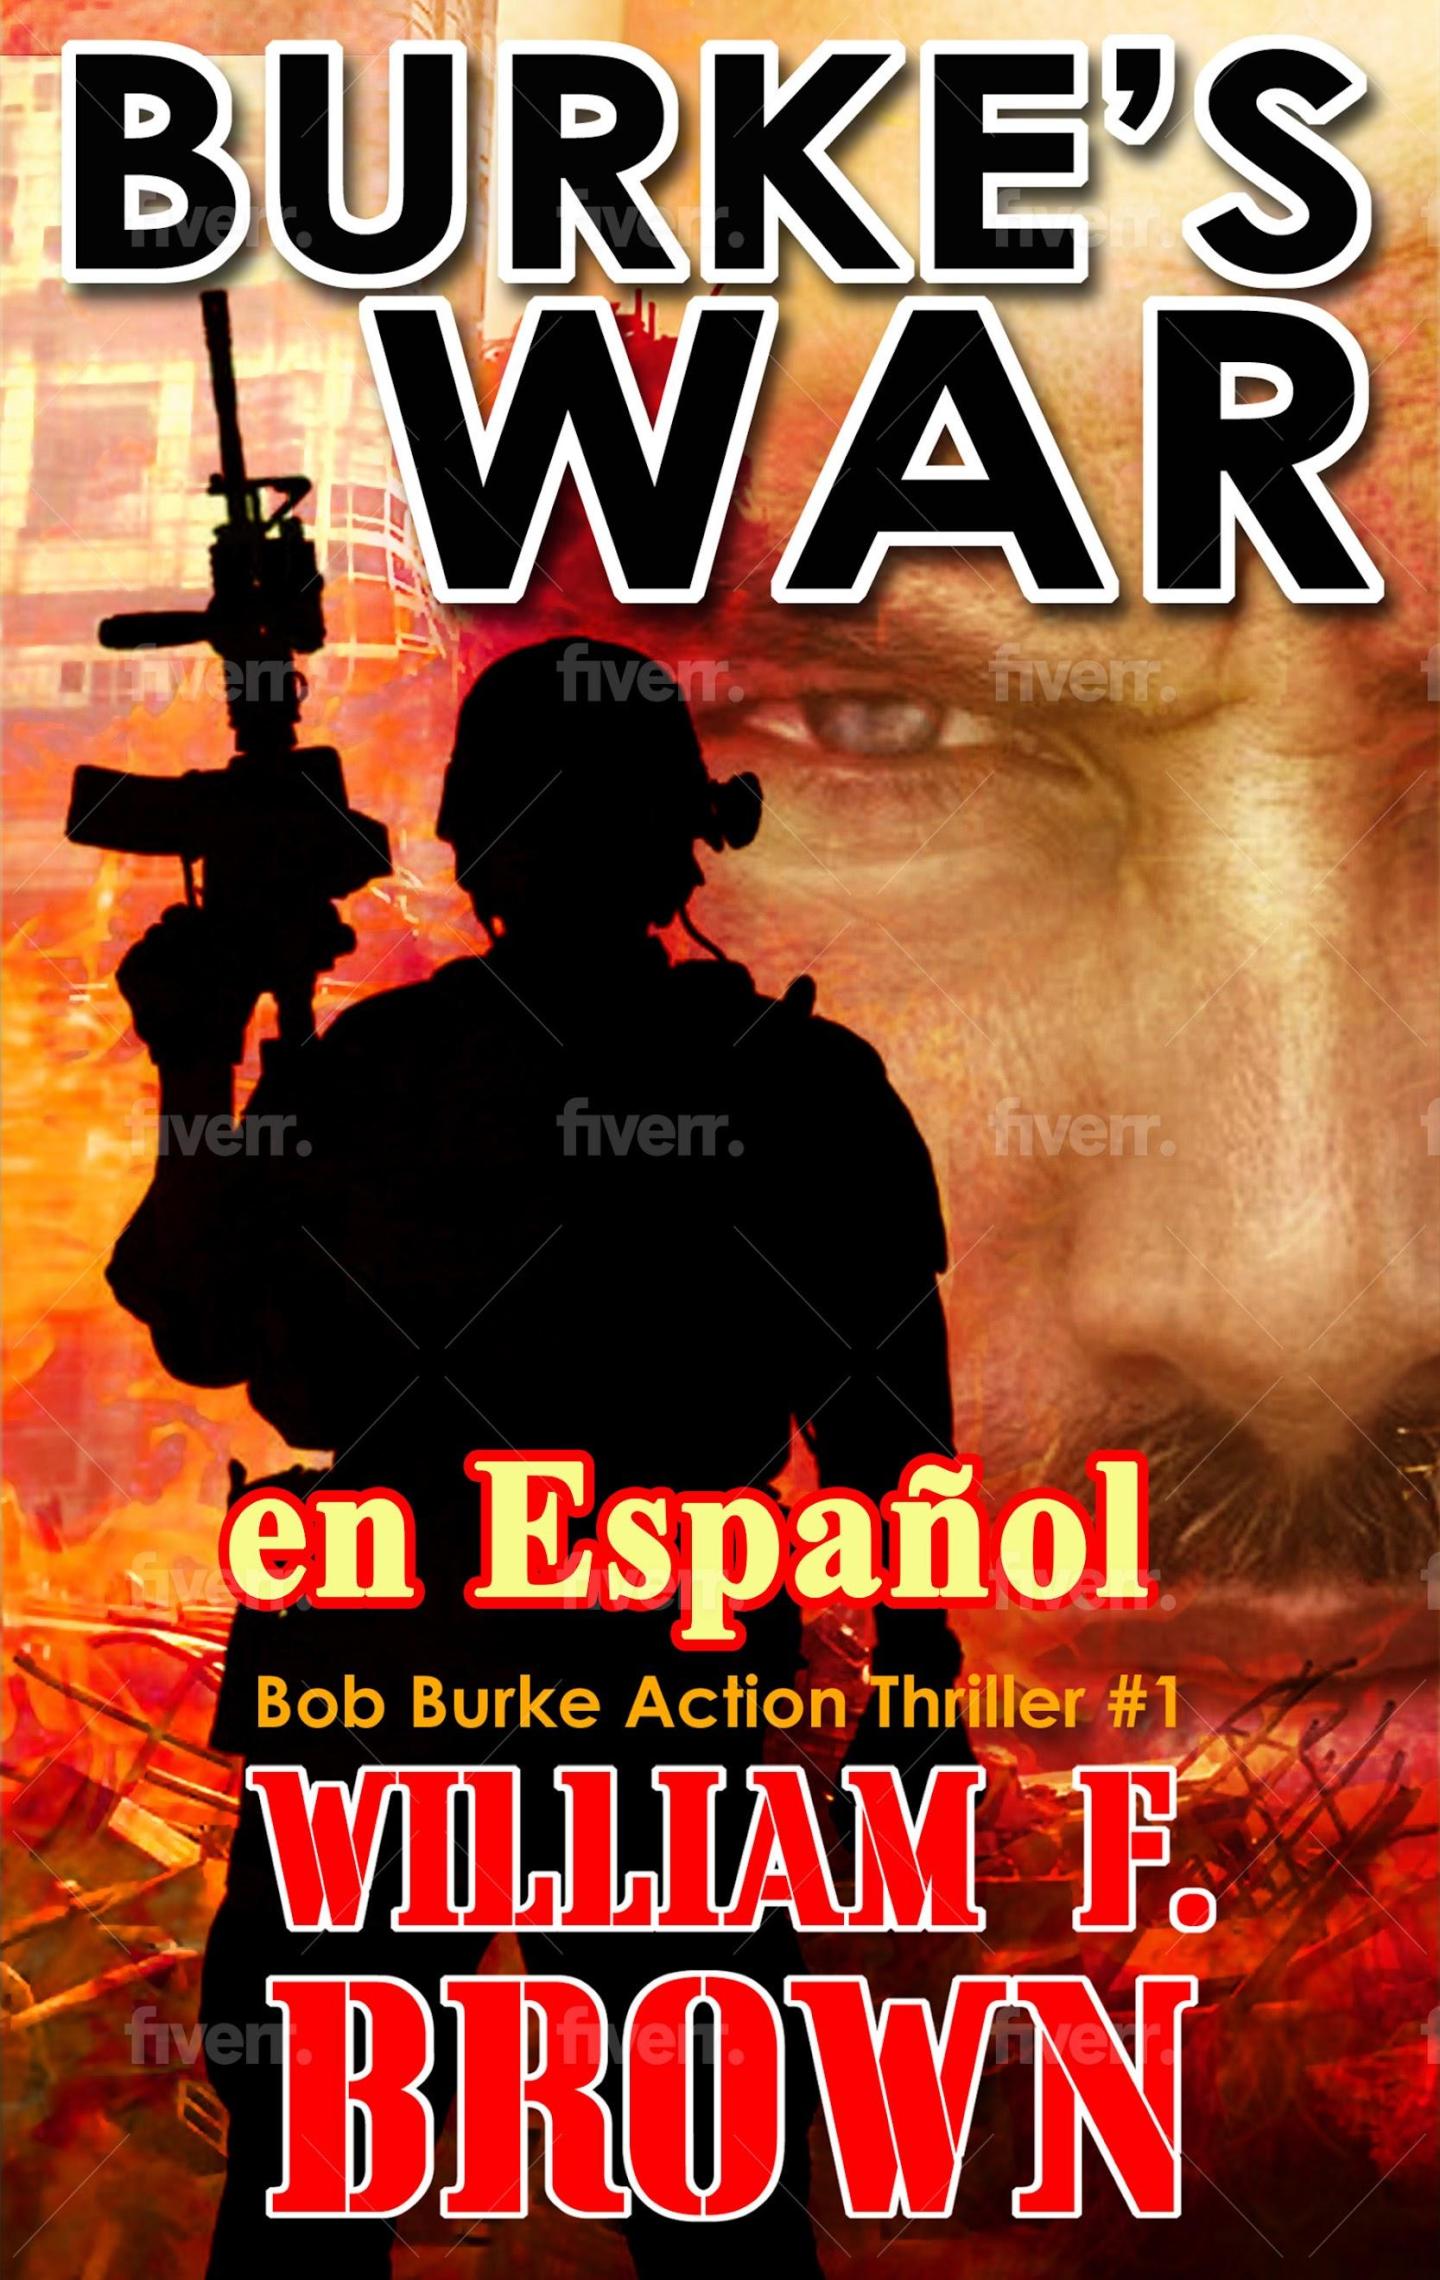 BURKE’S WAR IS NOW AVAILABLE ON KINDLE IN SPANISH